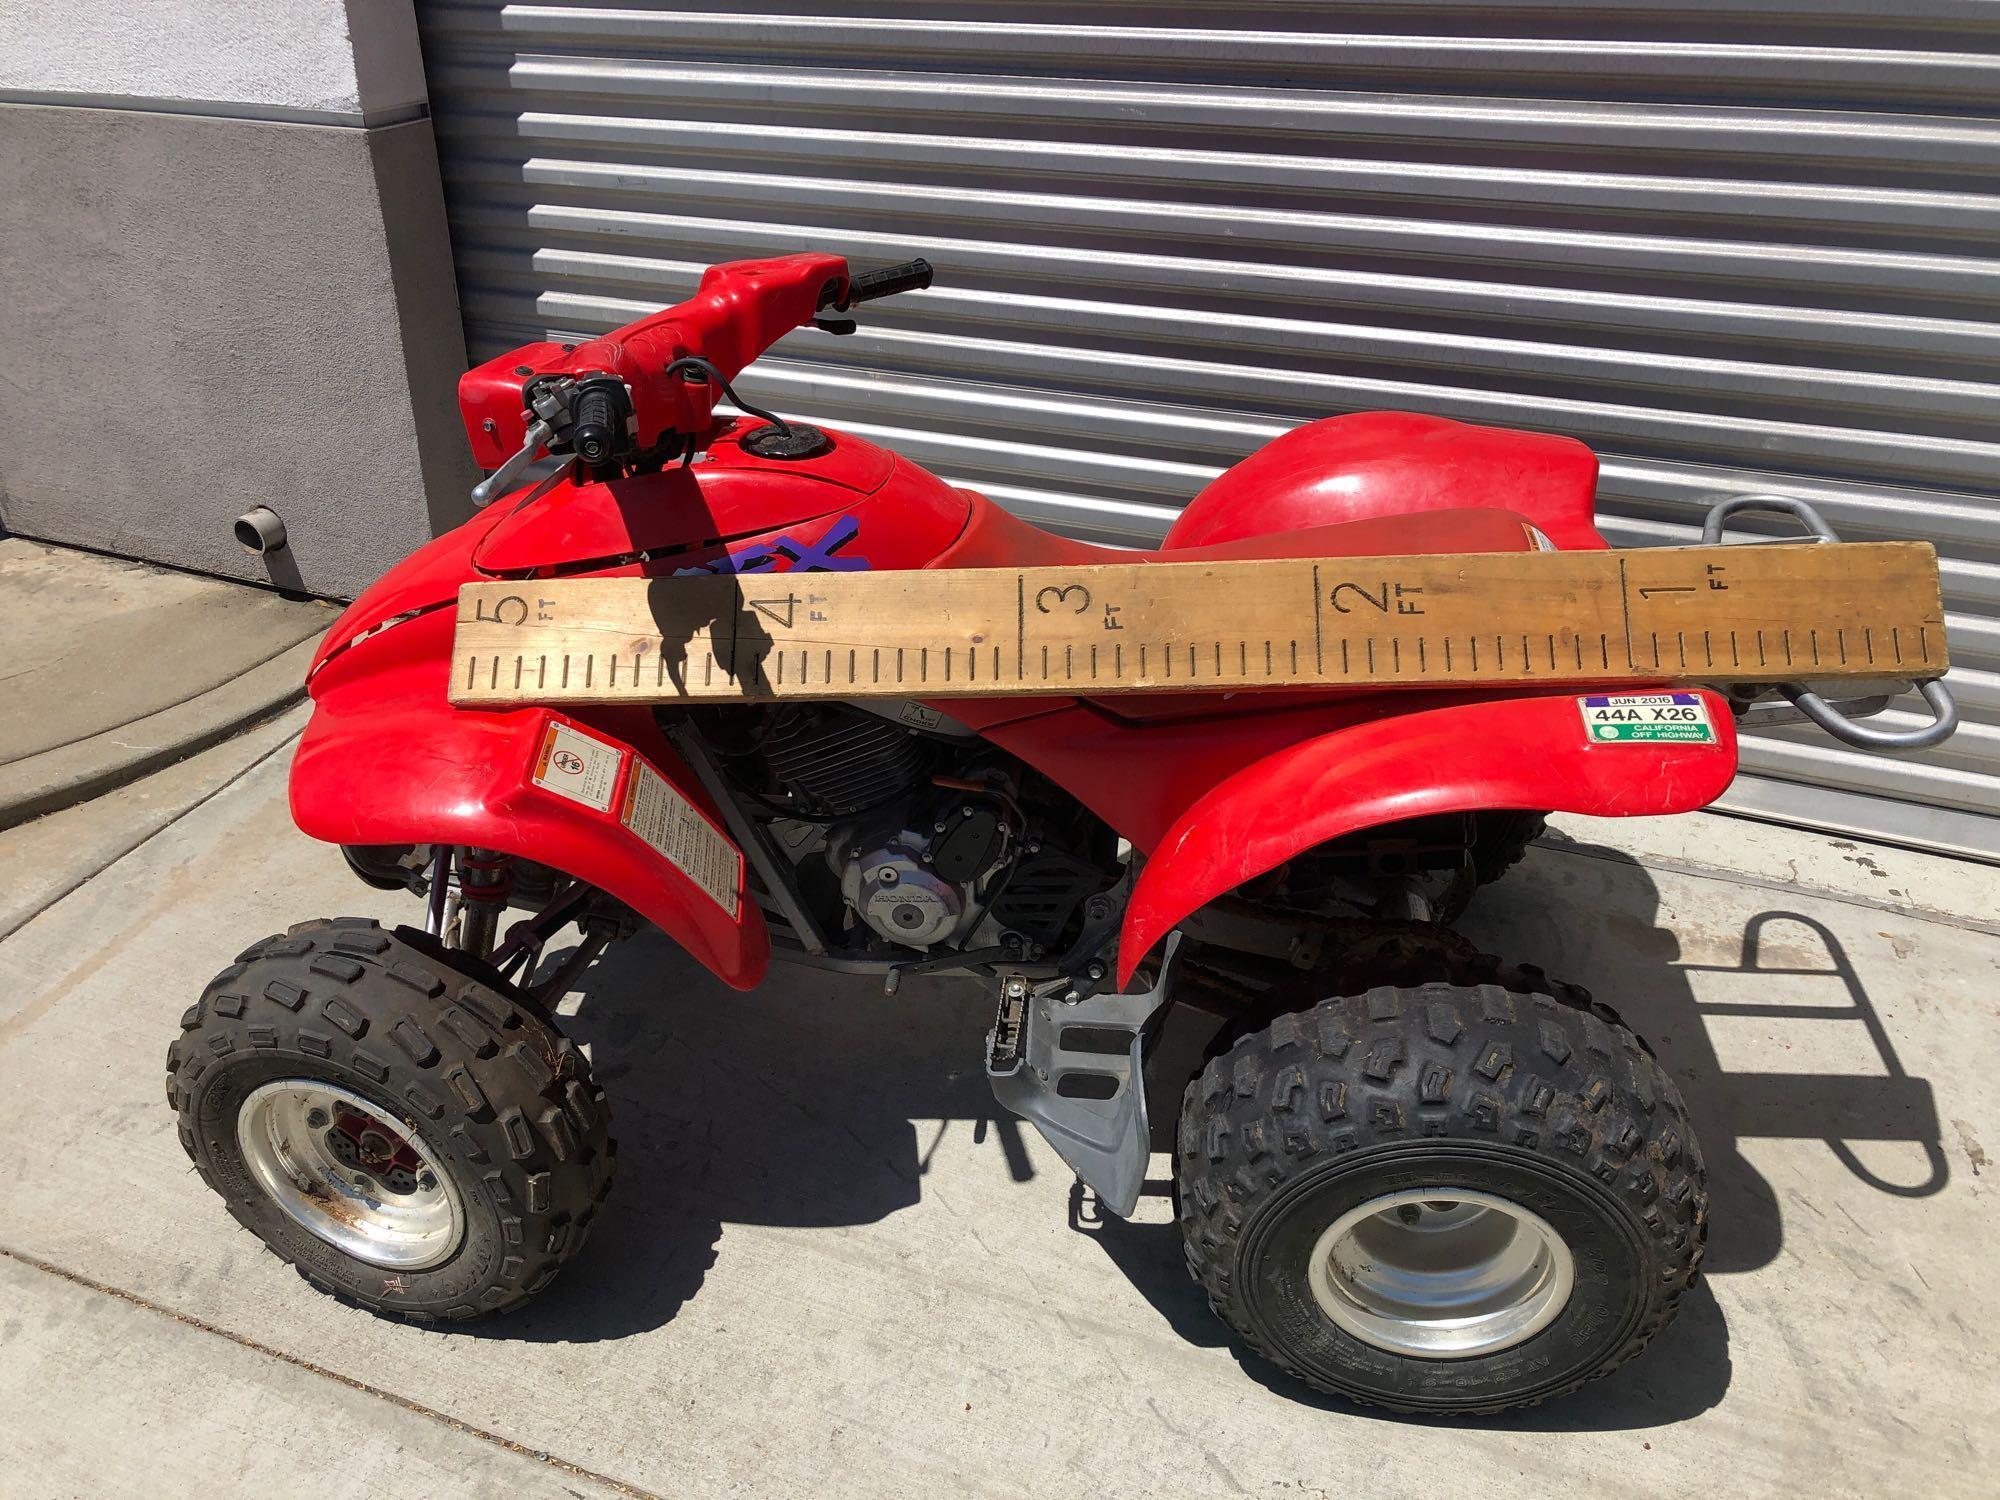 1995 Honda TRX300EX FourTrax ATV Motorcycle with Signed Title reg Good until 2020